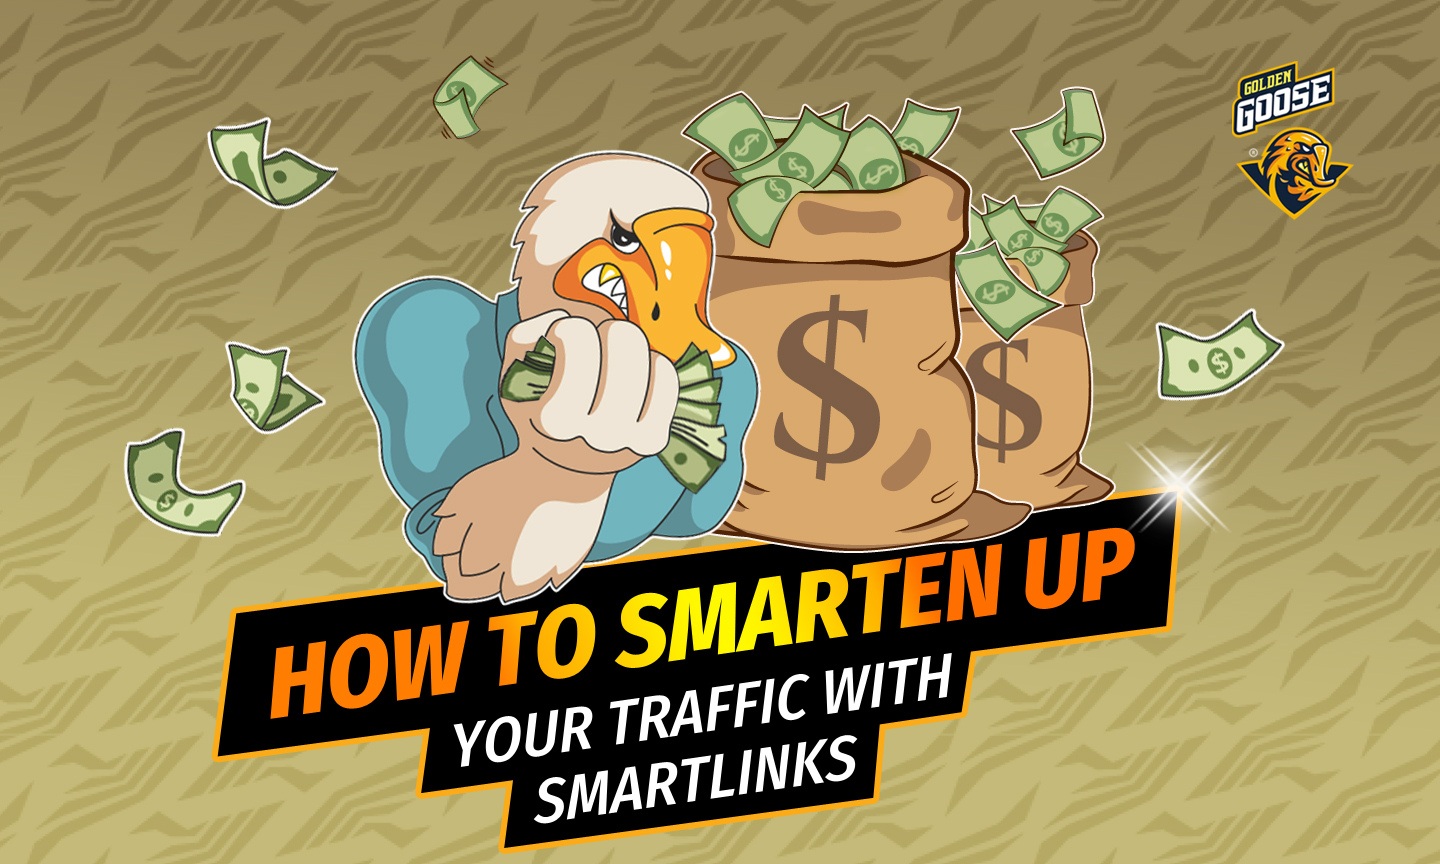 How to Smarten Up Your Traffic with SmartLinks